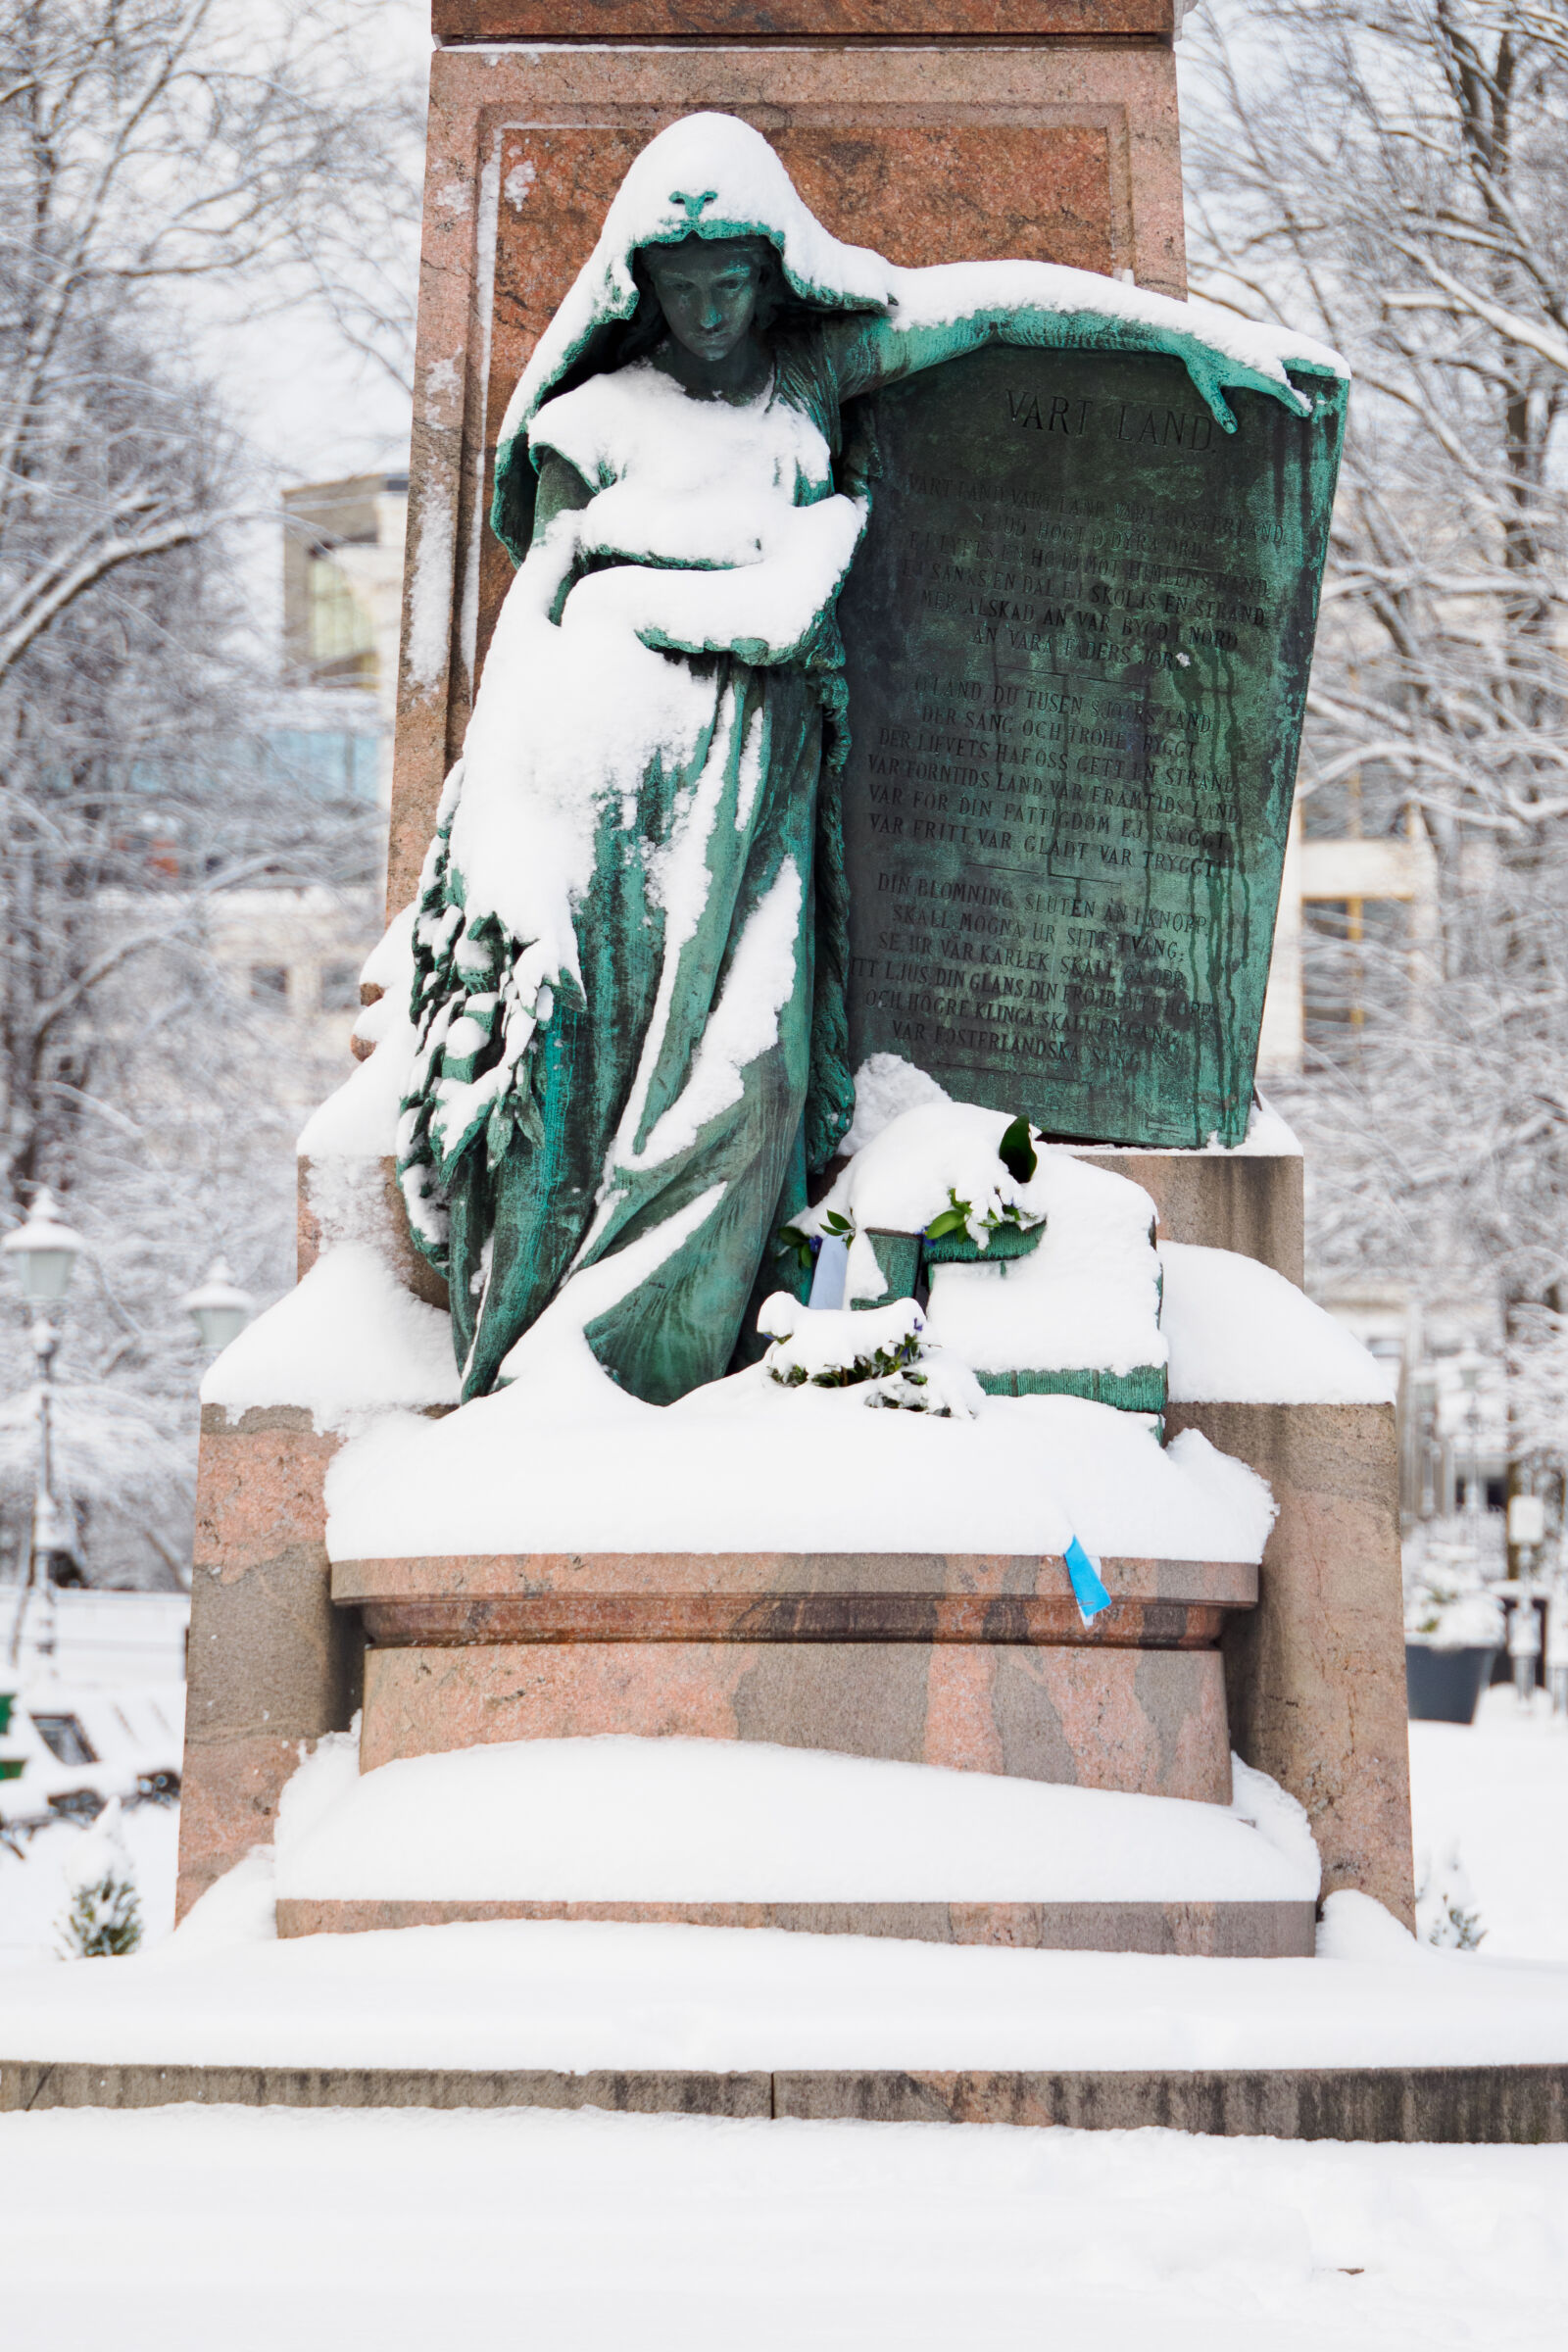 OM System OM-1 sample photo. Statue after snowstorm photography